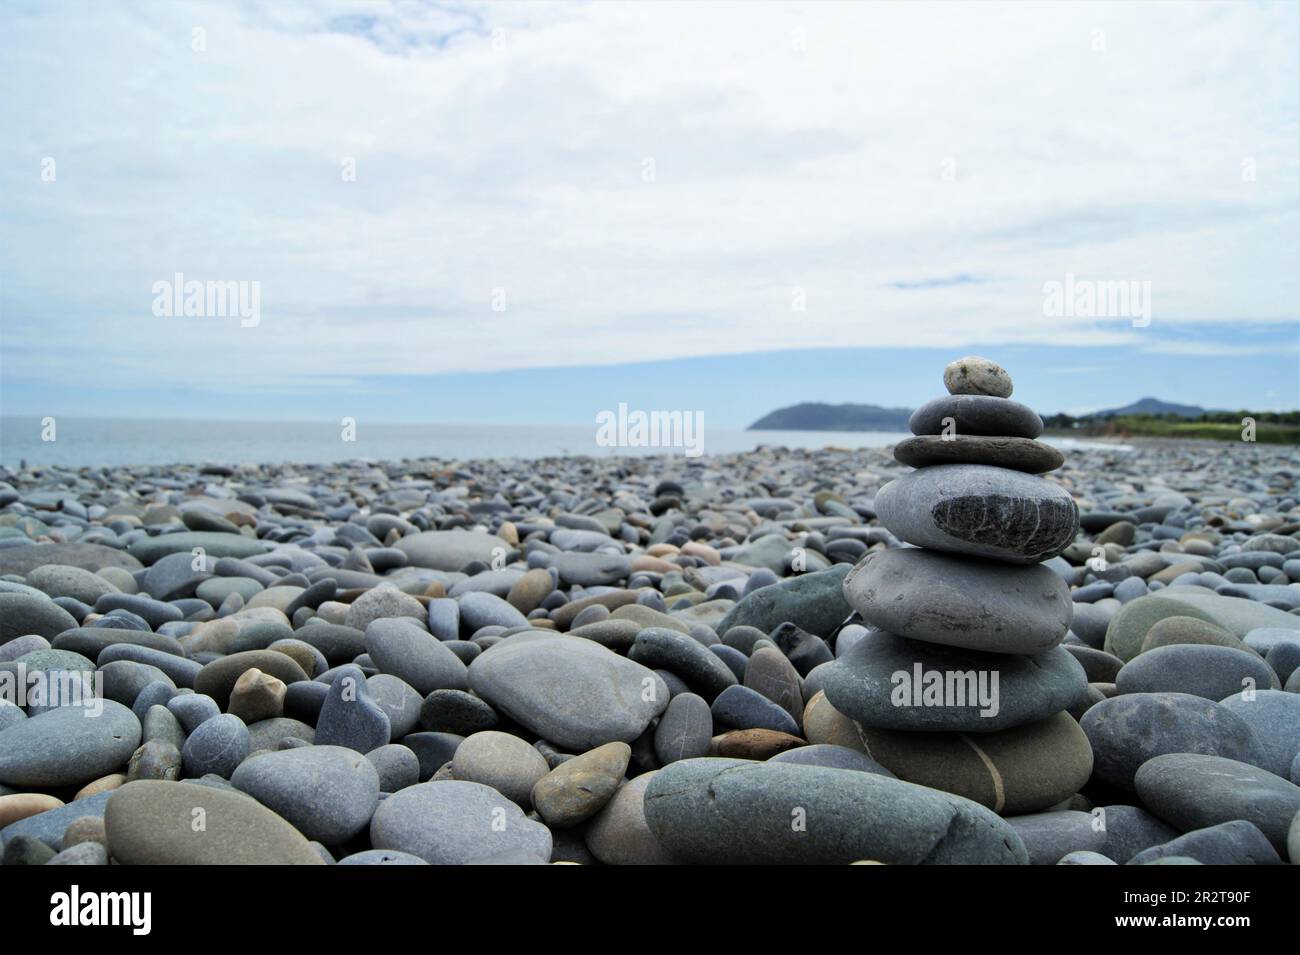 Zen towers on a stony beach. Towers made of pebbles. Stock Photo